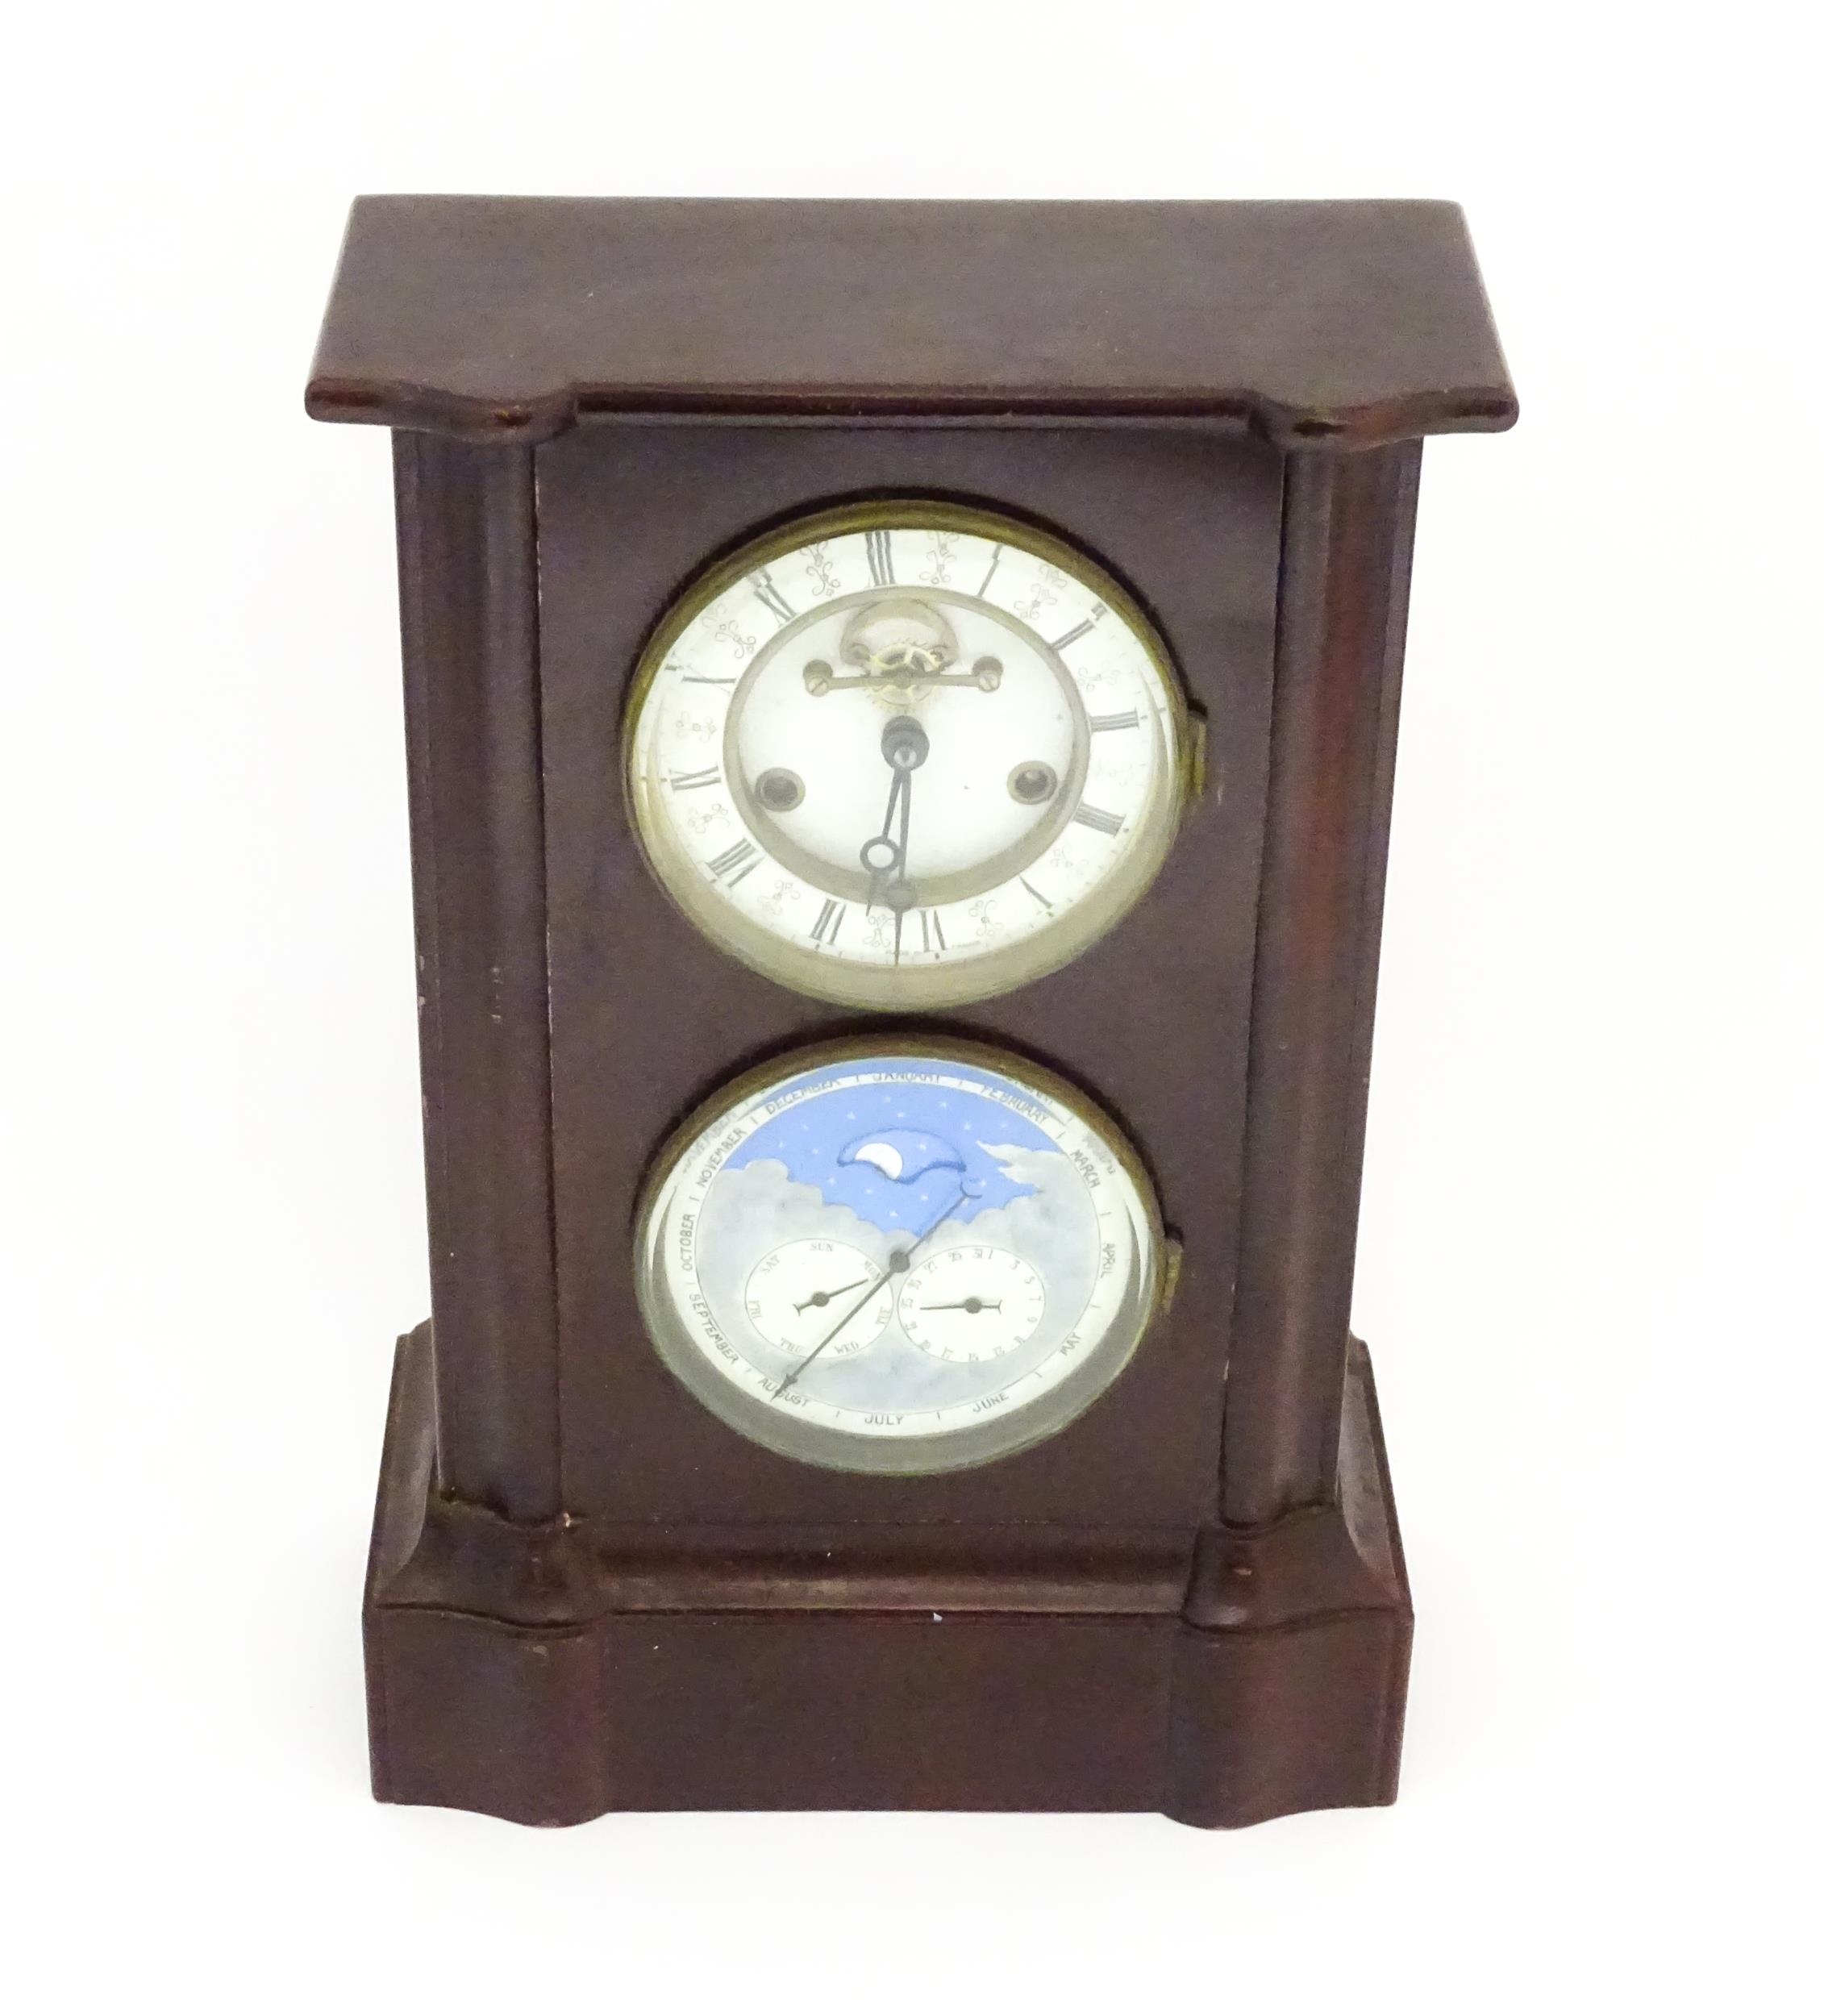 A French perpetual calendar clock, the wooden cased mantle clock having two piece enamel dial with - Image 3 of 10